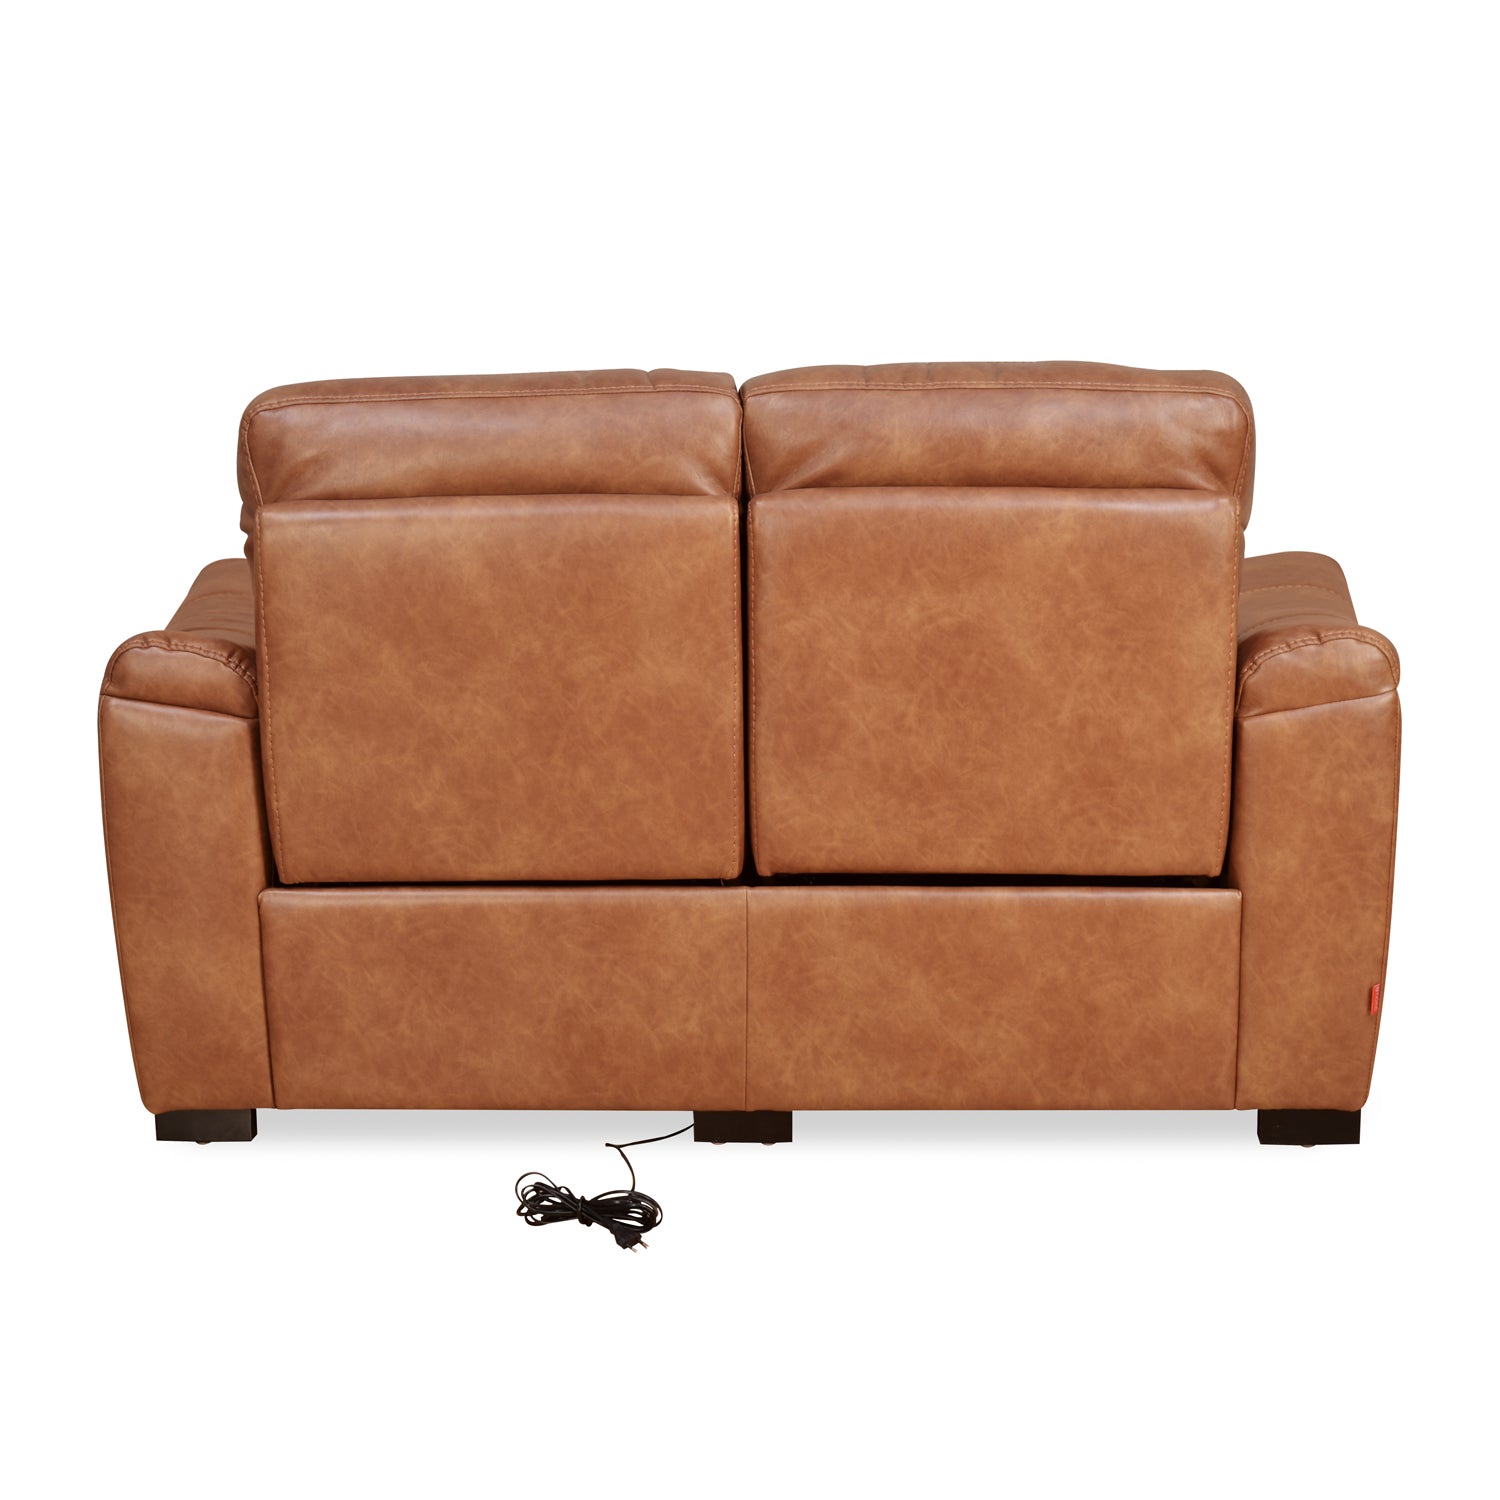 Evelyn 2 Seater Sofa Electrical Recliner (Tan Brown)